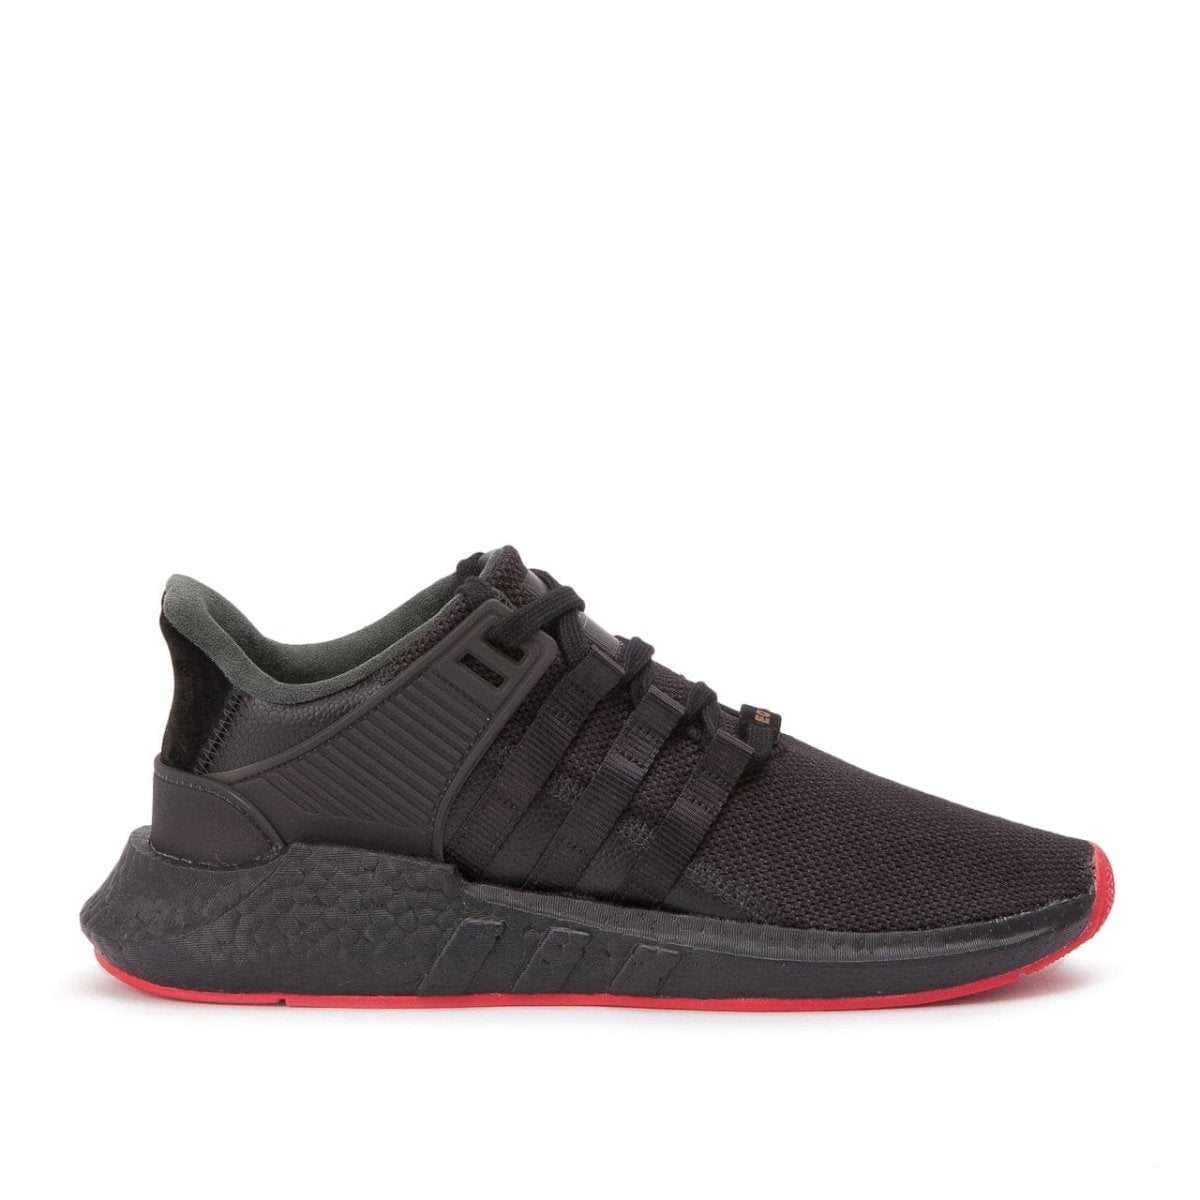 adidas EQT Support 93/17 Boost 'Red Carpet Pack' (Schwarz / Rot)  - Allike Store